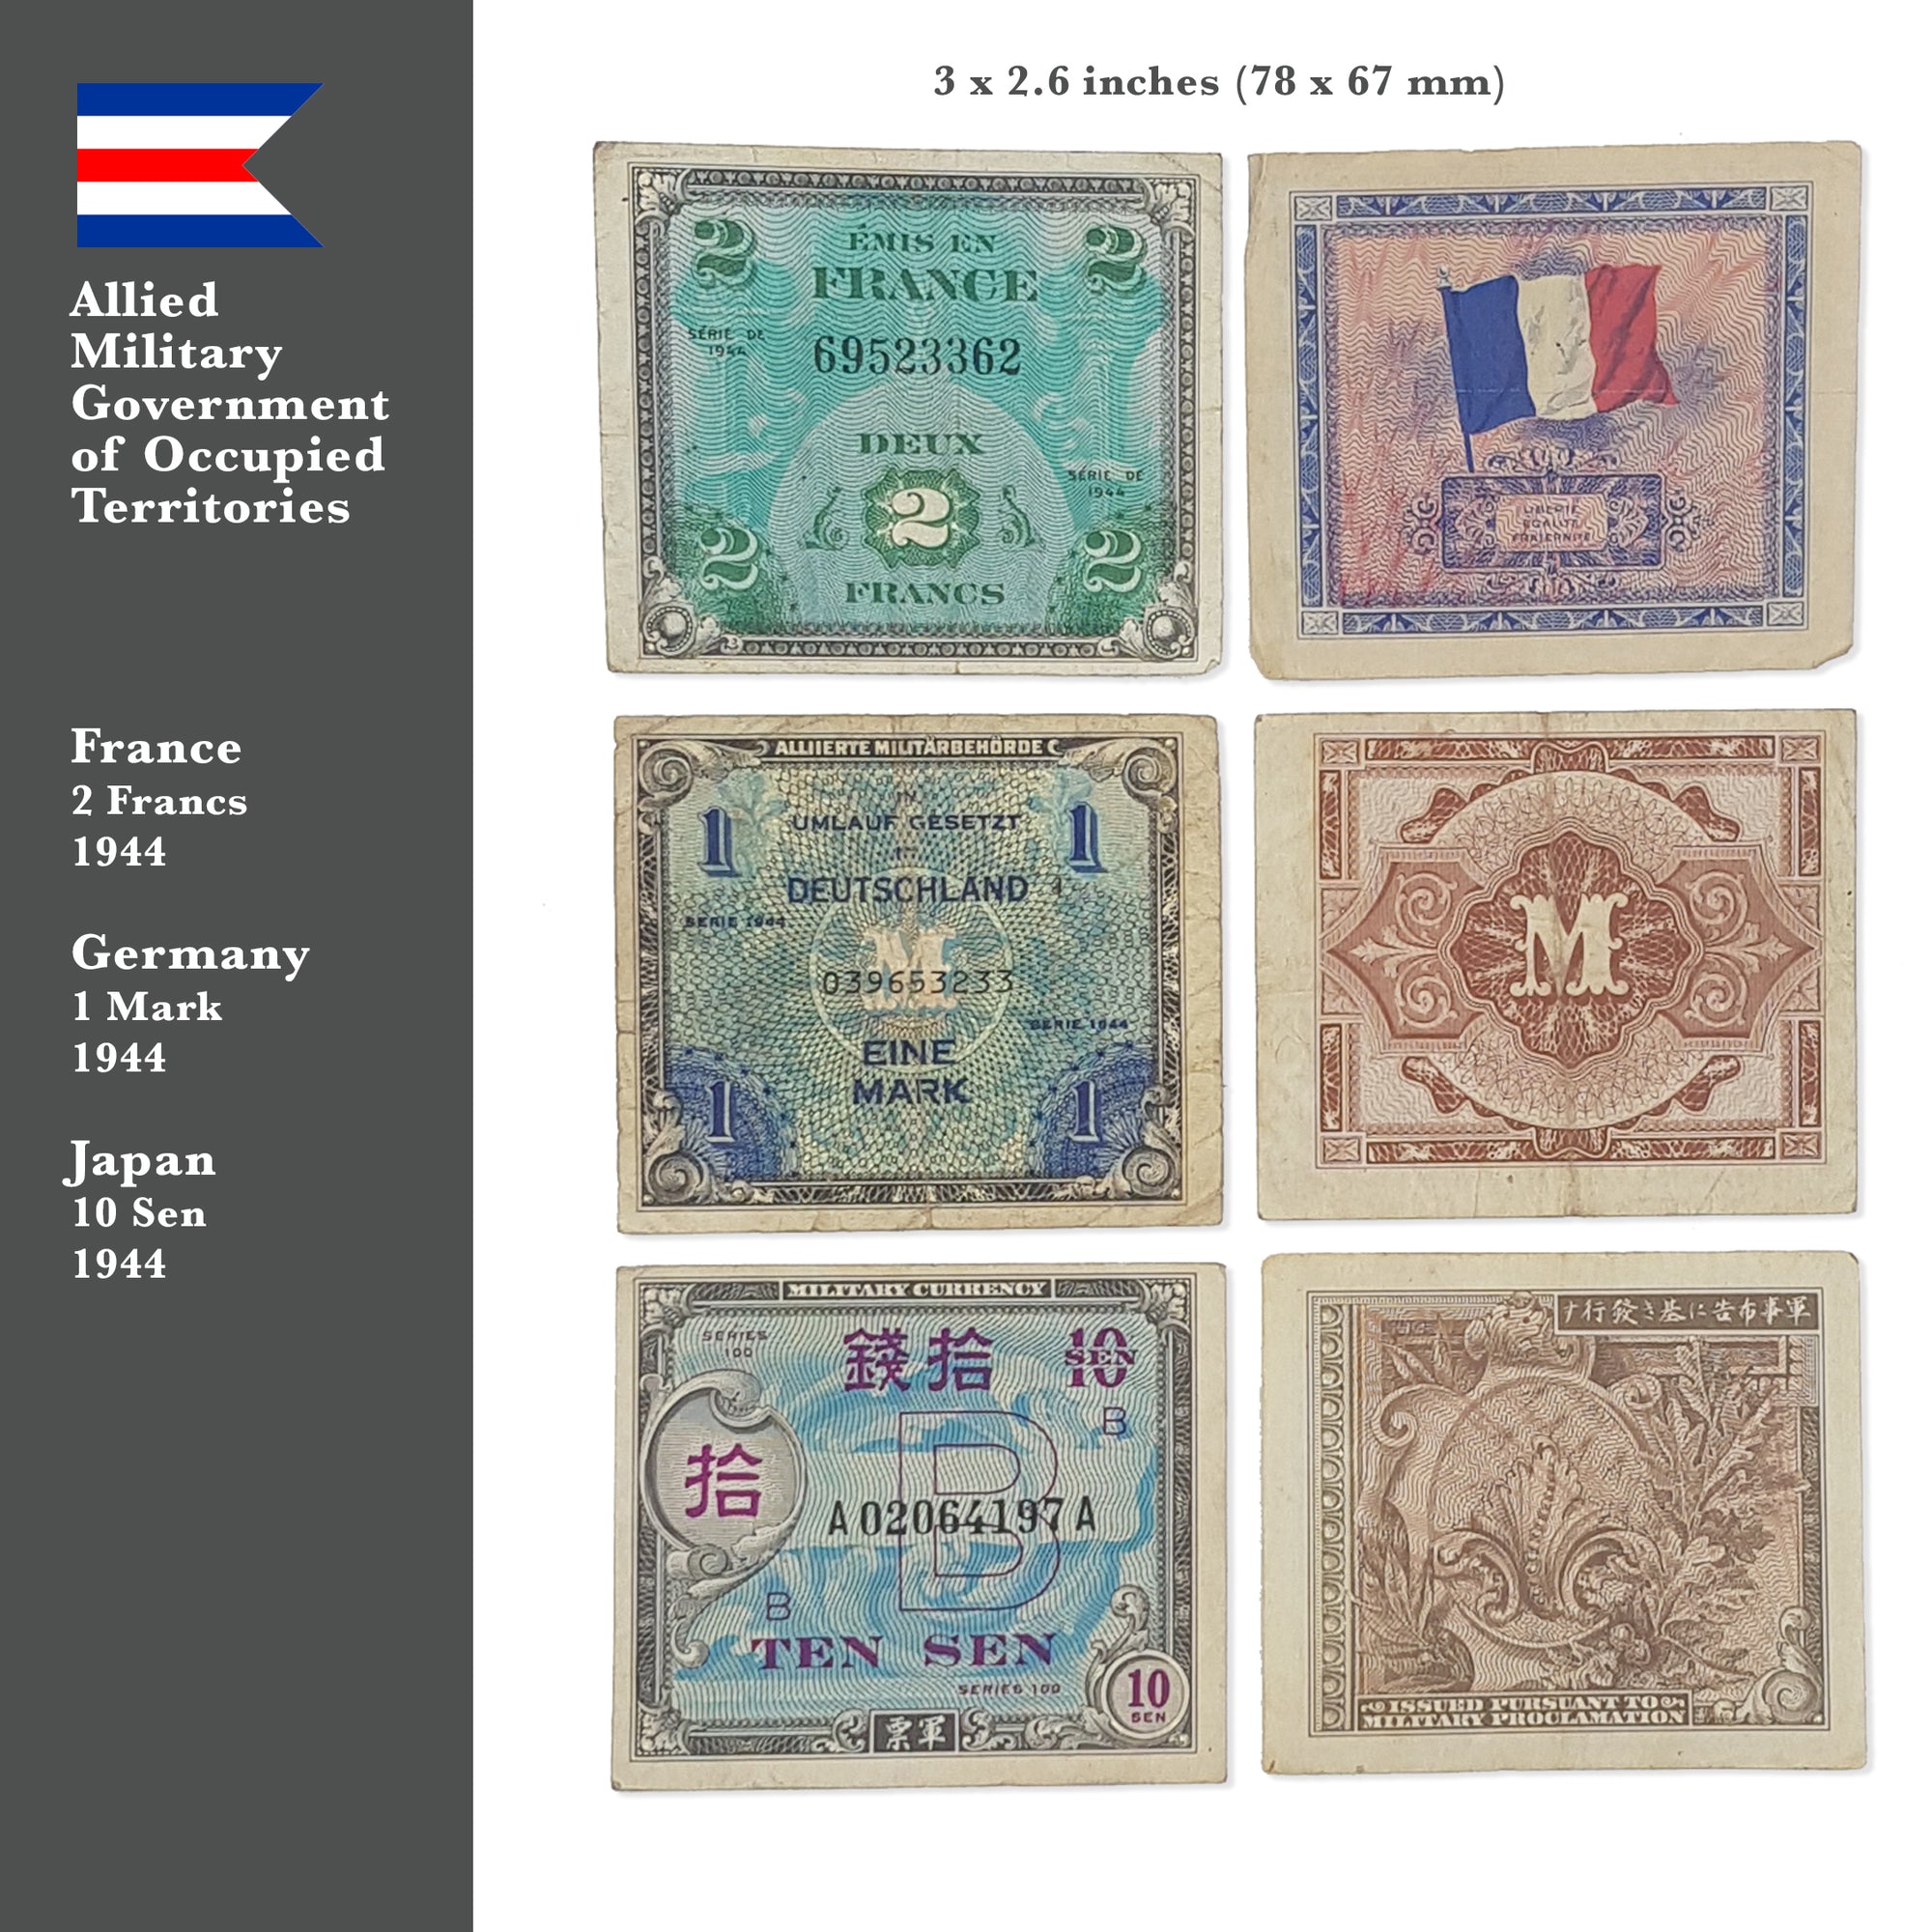 Allied Military Currency. Second World War - 3 banknotes from Germany, France and Japan, Allied Occupied Countries. Certificate of Authenticity Included